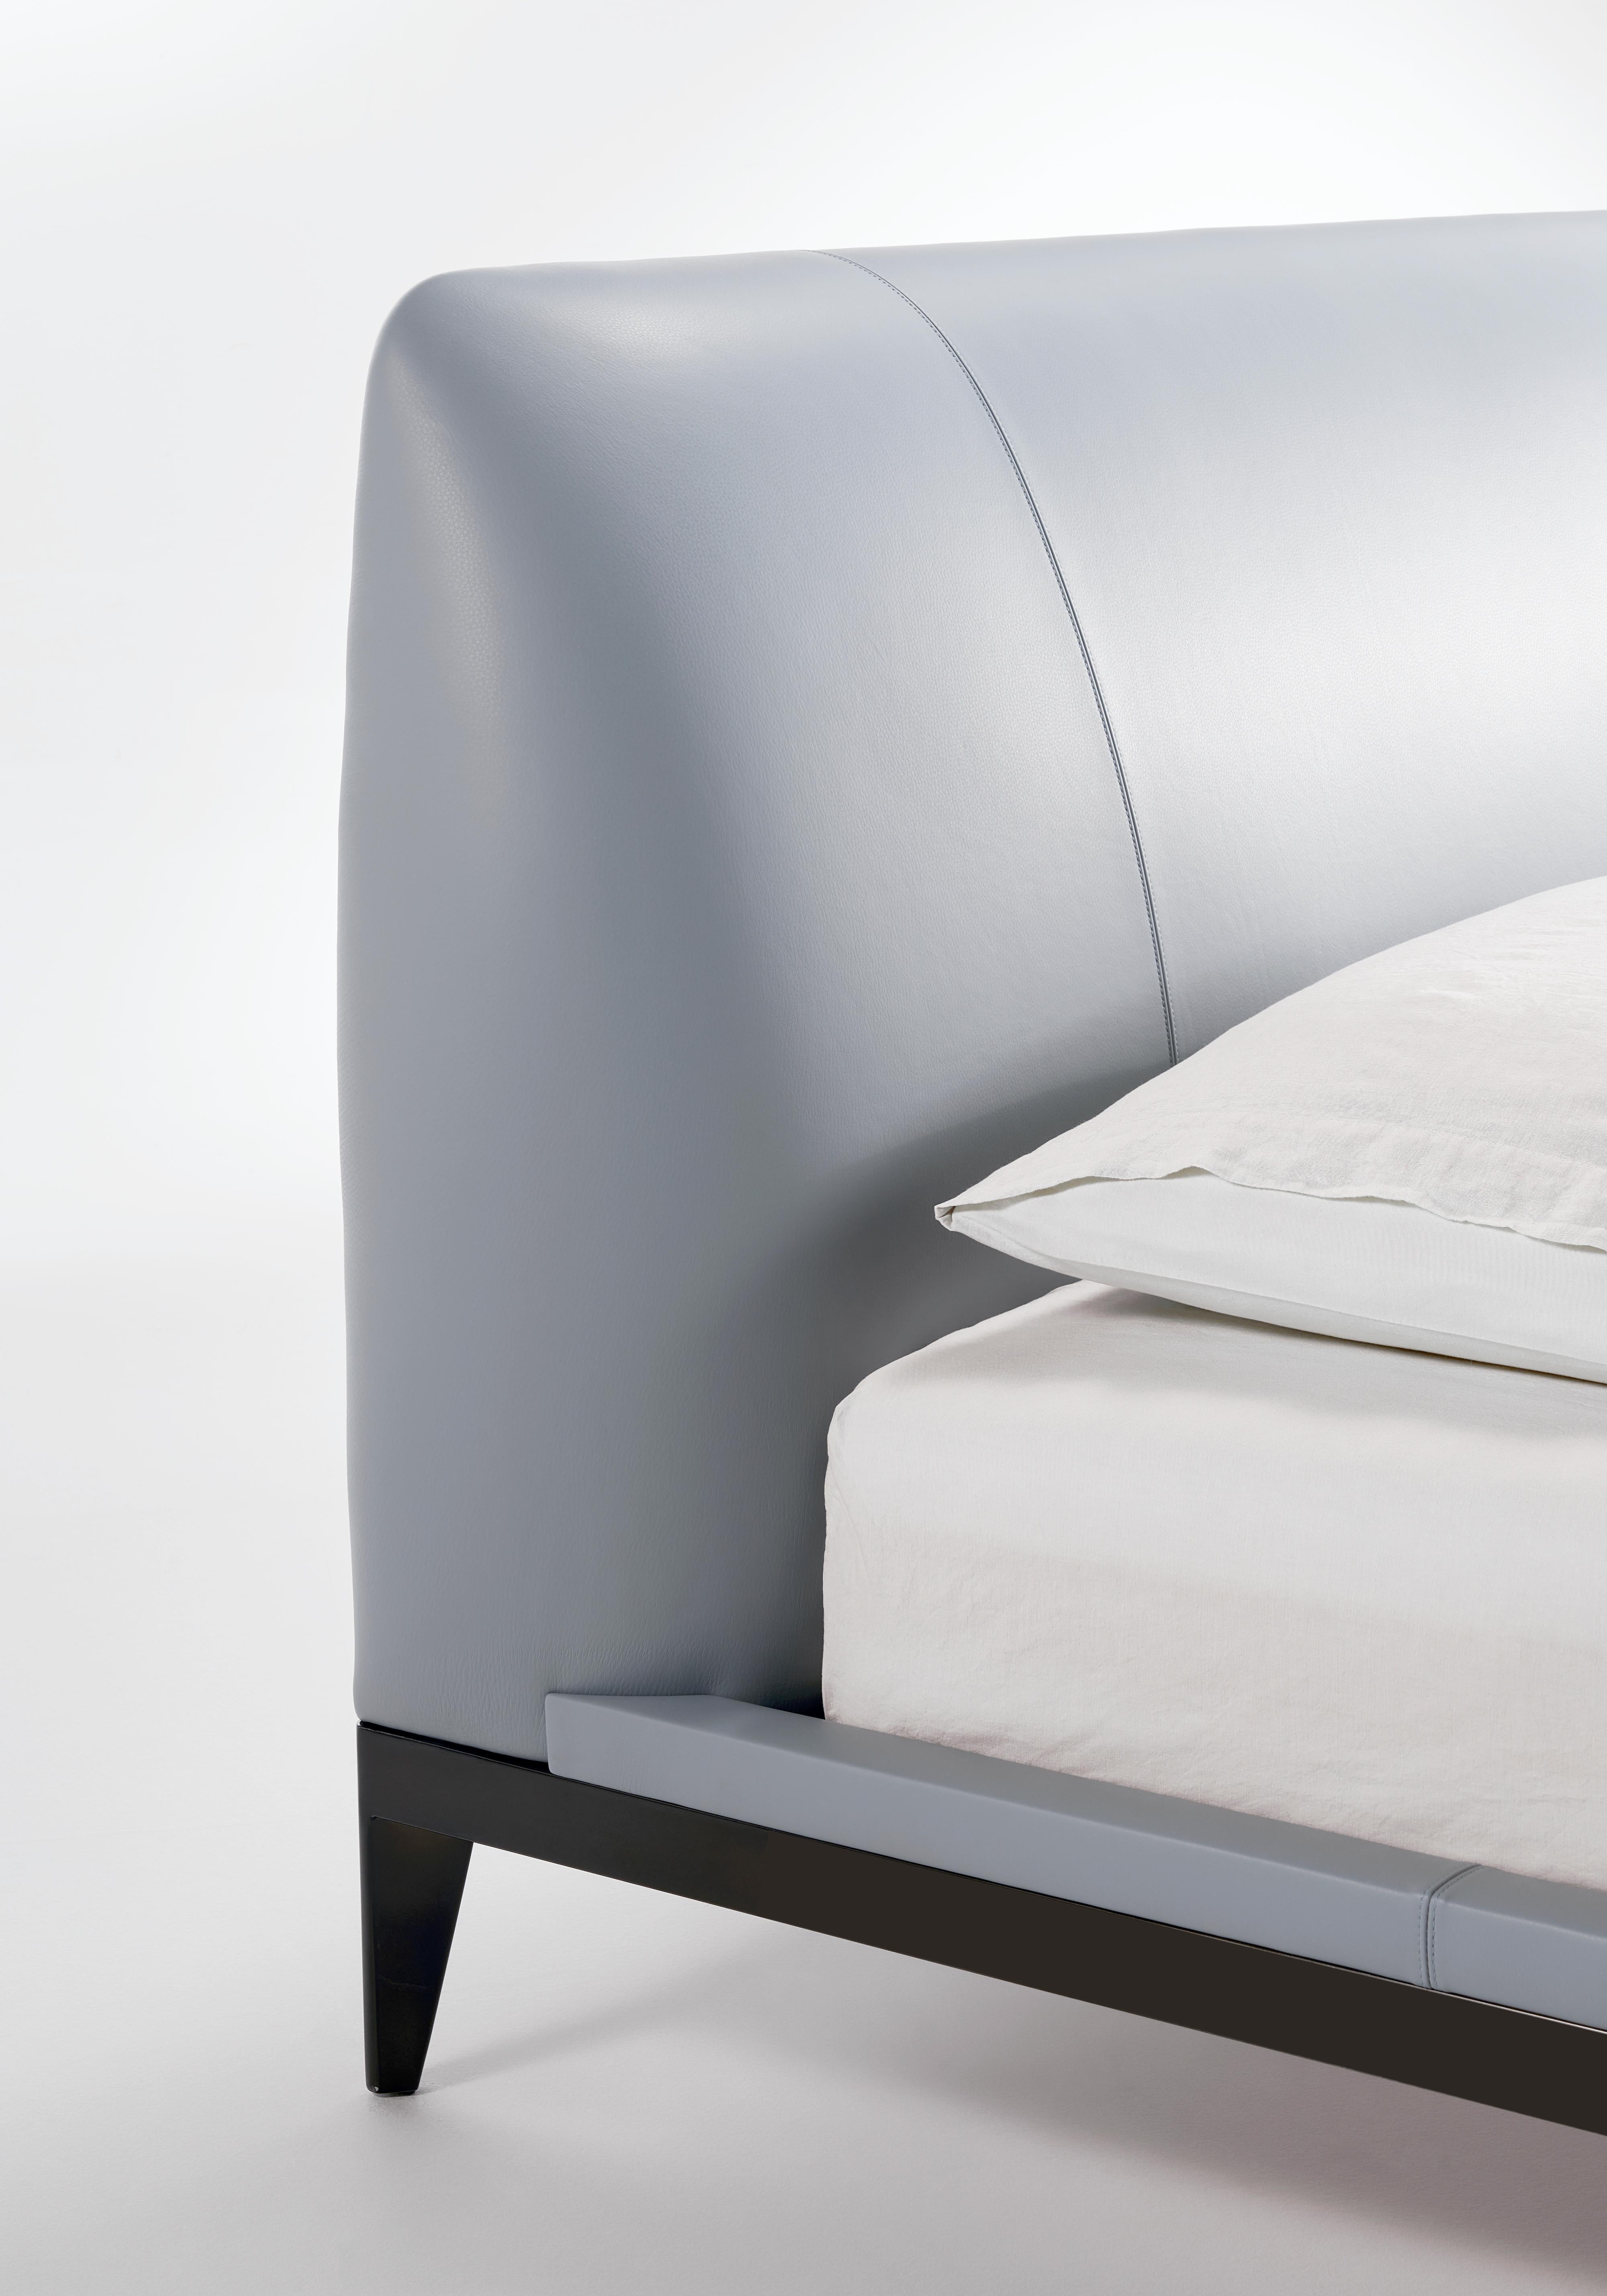 Designed by Brazilian designer Ricardo Antonio, the Adesso bed has essential shapes, made appealing by the metal frame that lends dynamism and lightness. The headboard with 'generous padding makes it extremely comfortable and also allows it to be